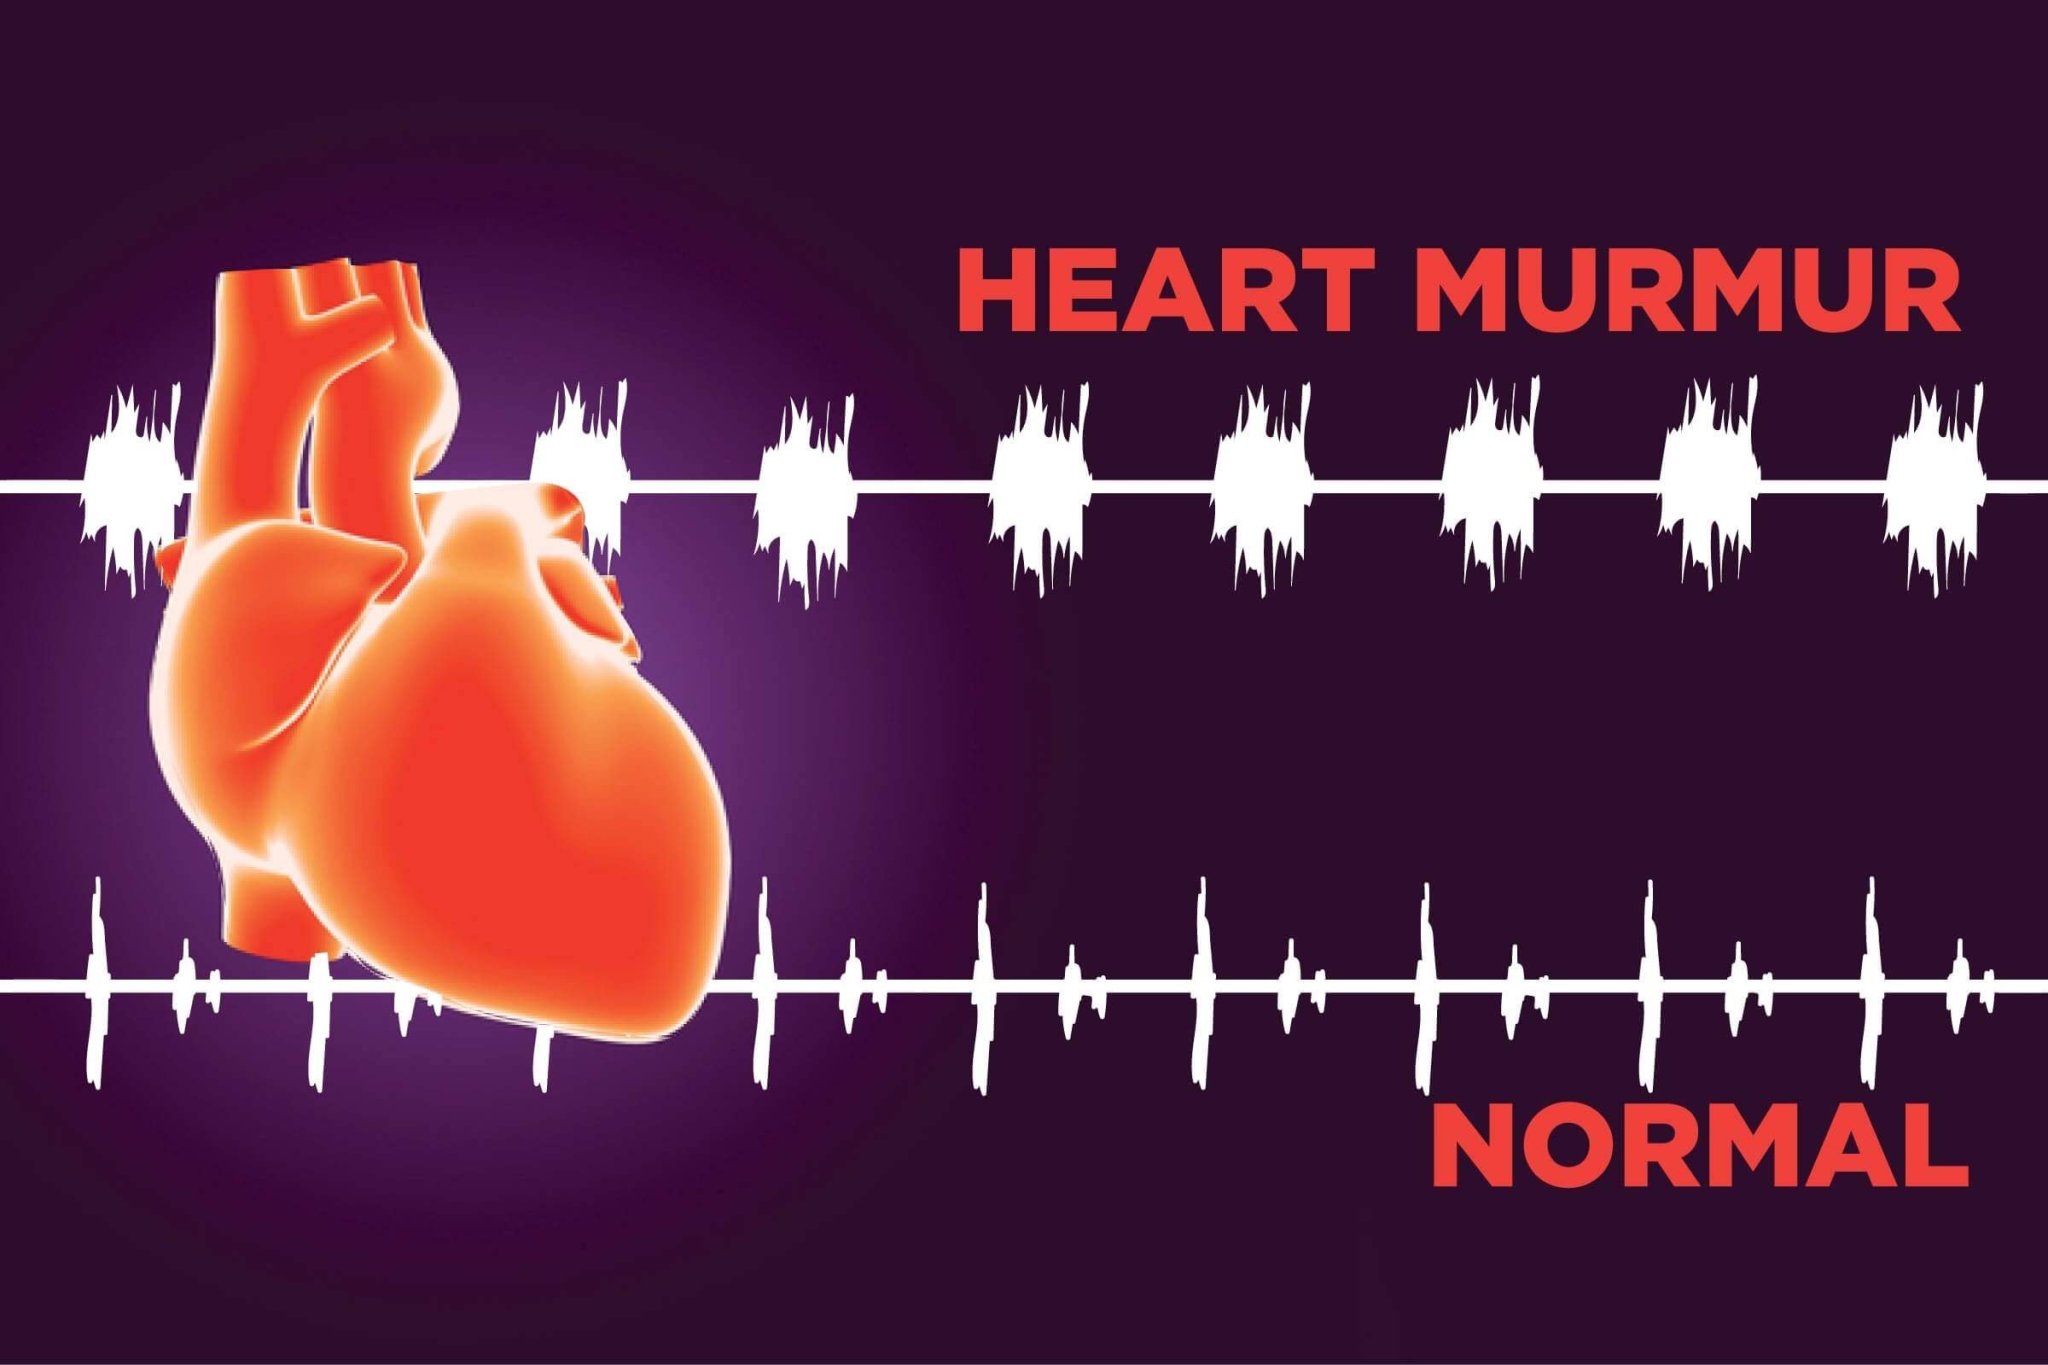 8 Silent Signs You May Have Heart Murmur